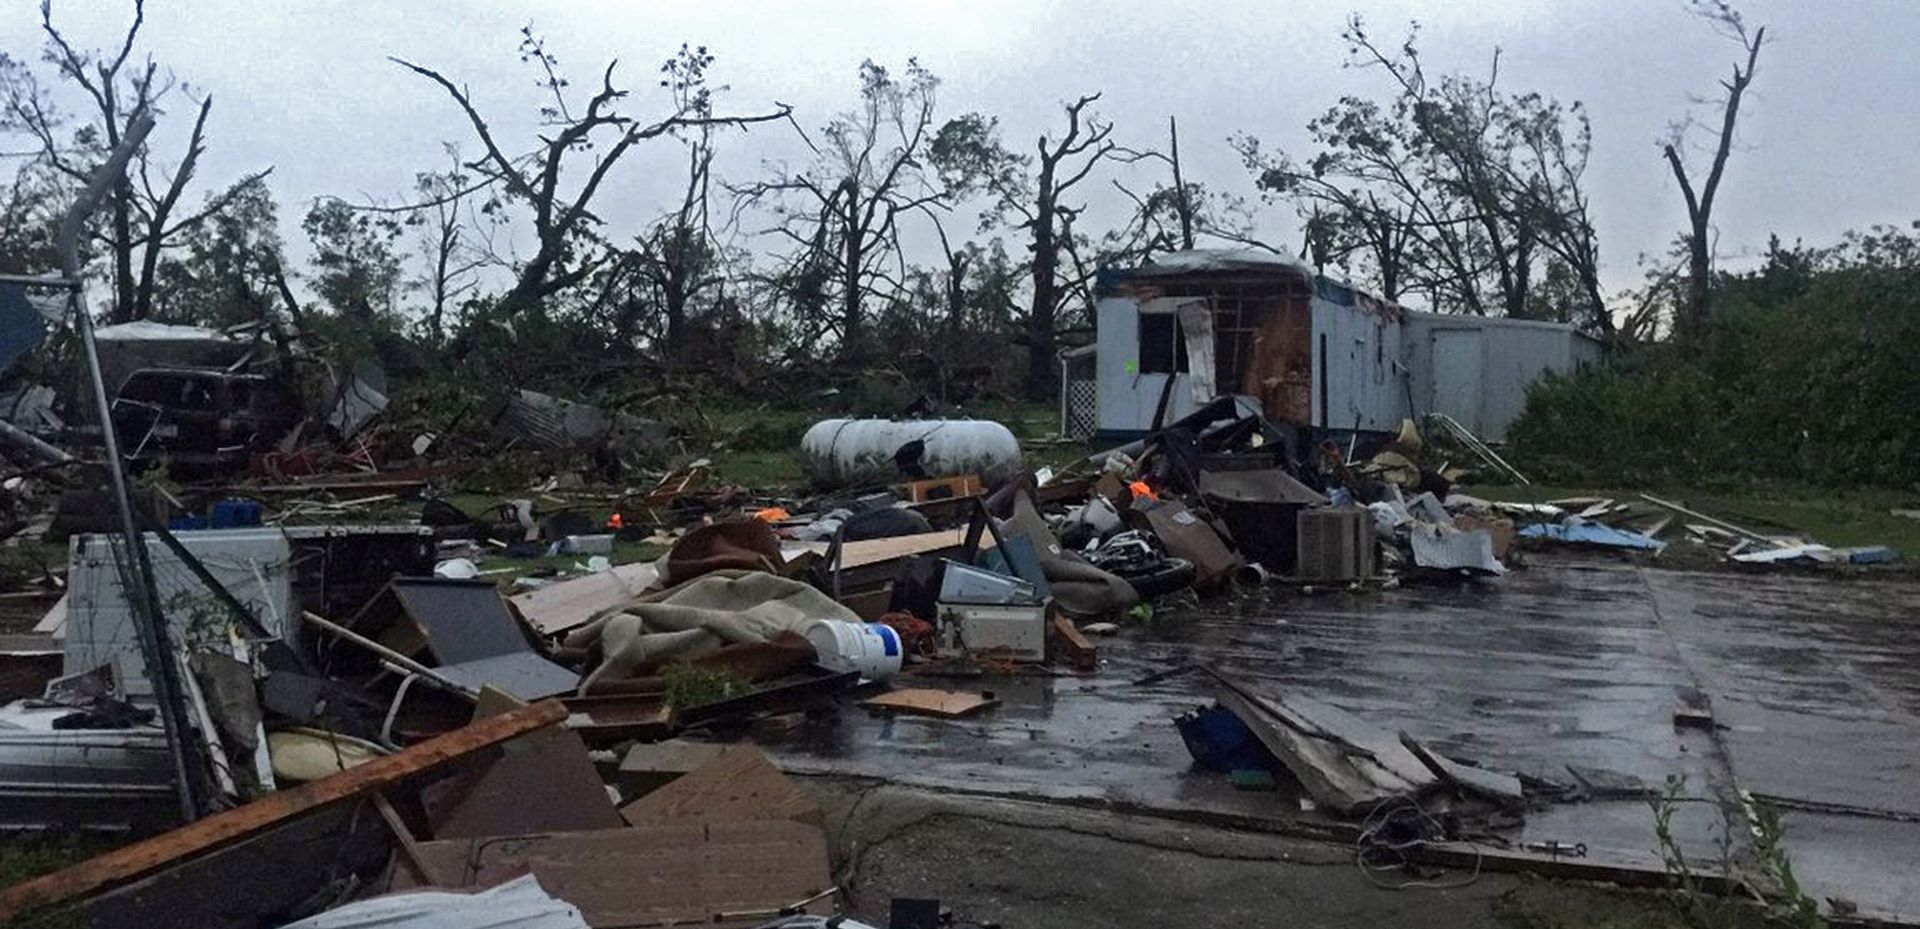 epa07594532 A handout photo made available by the Missouri State Emergency Management Agency shows damage after large storms with tornados moved across the state overnight, in Jefferson City, Missouri, USA, 23 May 2019. A tornado hit Jefferson City, Missouri on 22 May 2019.  EPA/MISSOURI STATE EMERGENCY MANAGEMENT AGENCY / HANDOUT  HANDOUT EDITORIAL USE ONLY/NO SALES